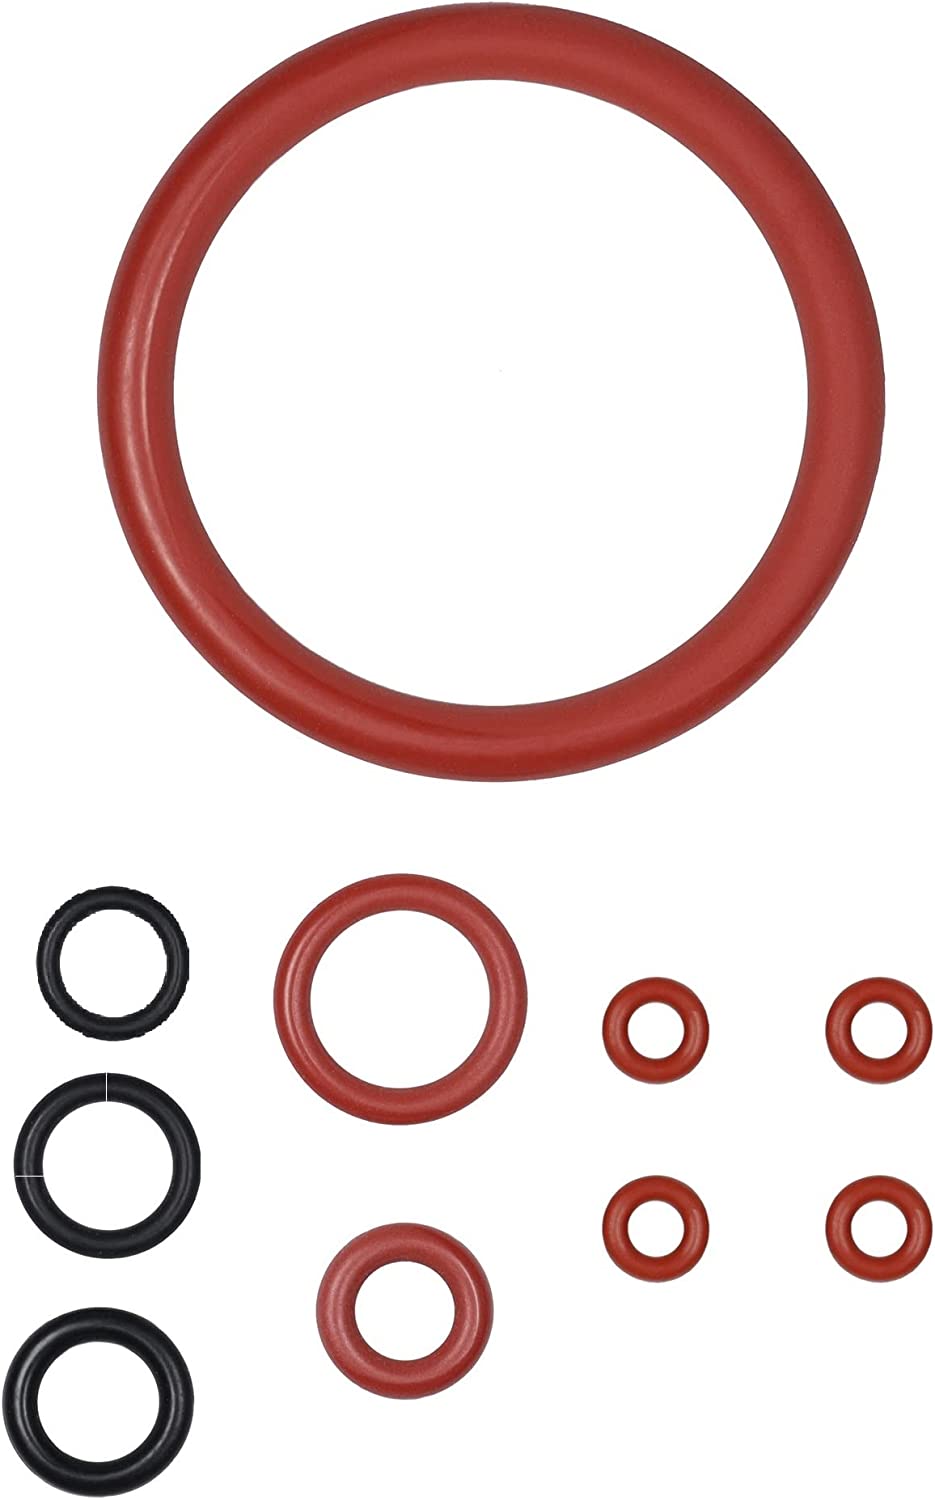 Maintenance Kit Seal Compatible with Philips Saeco Spidem Gaggia for Brewing Group Support Valve Outlet Nozzle